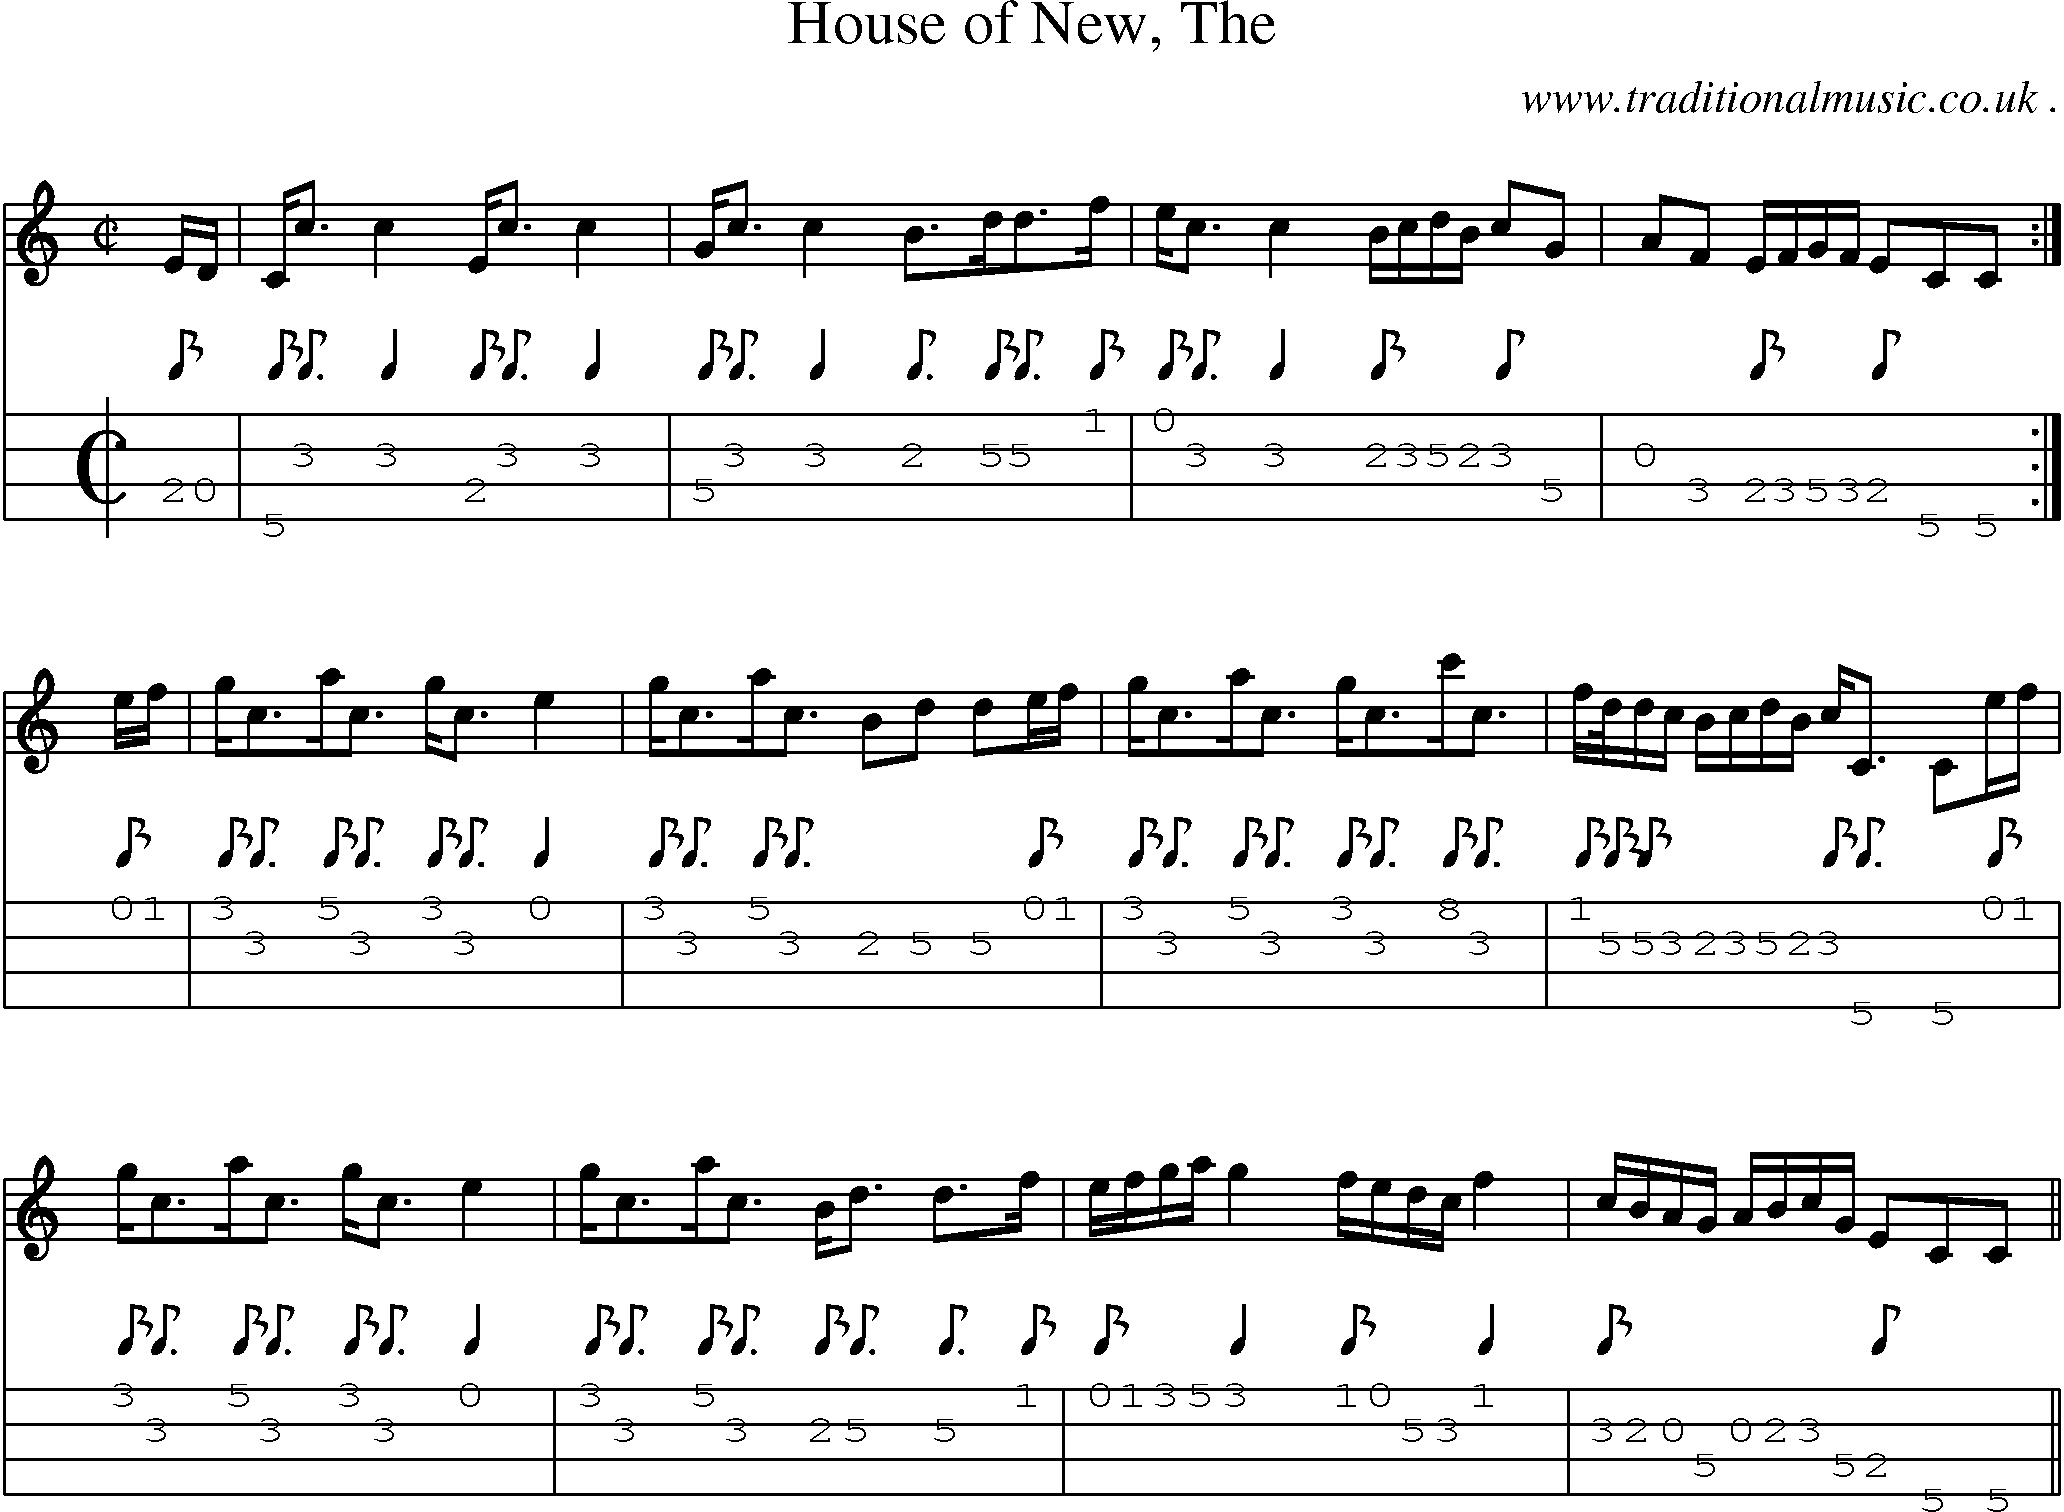 Sheet-music  score, Chords and Mandolin Tabs for House Of New The